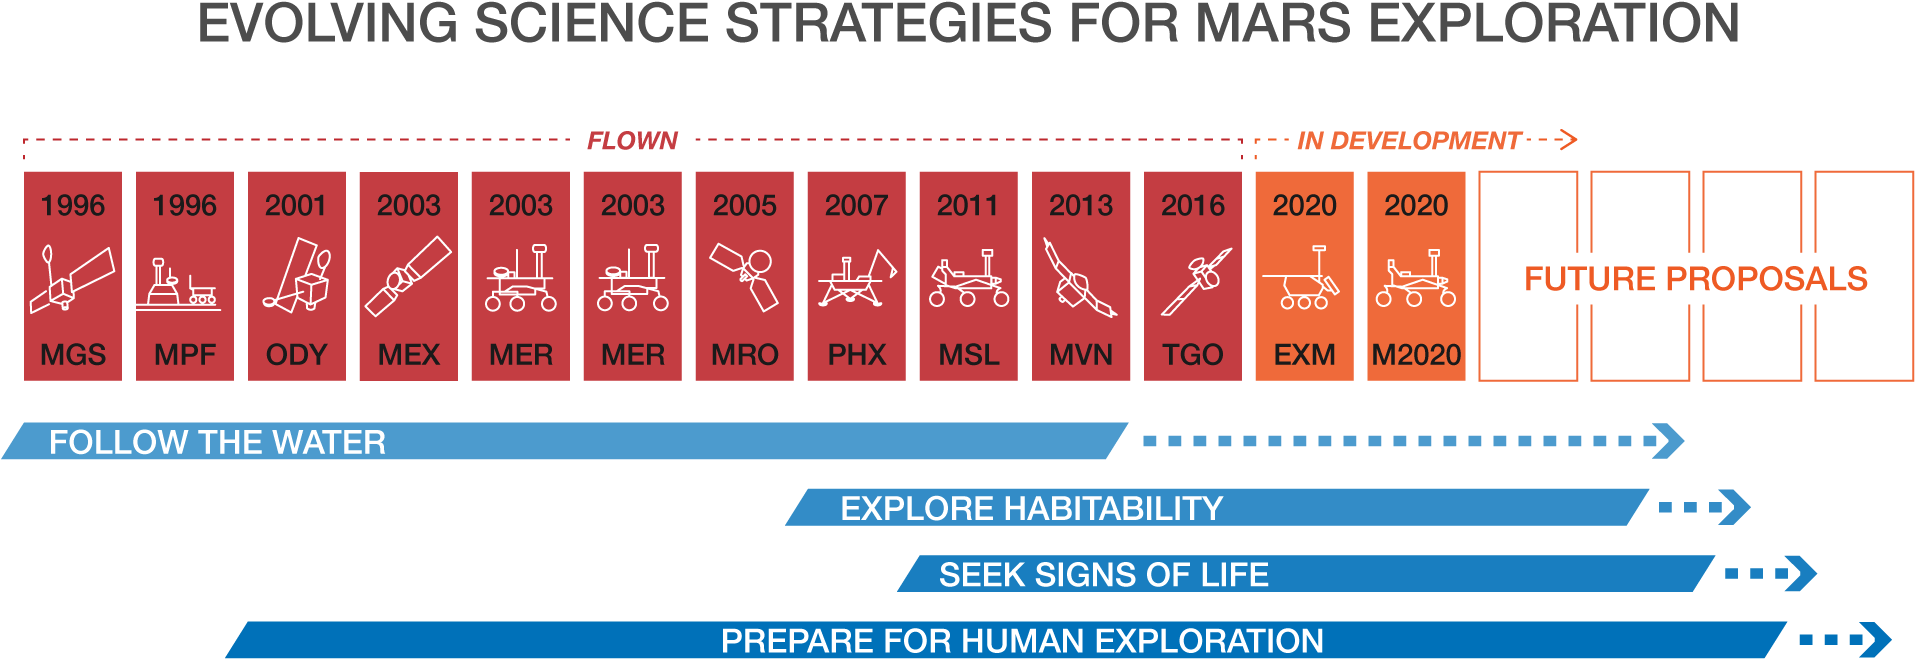 Mars Exploration Timelineand Strategies PNG image